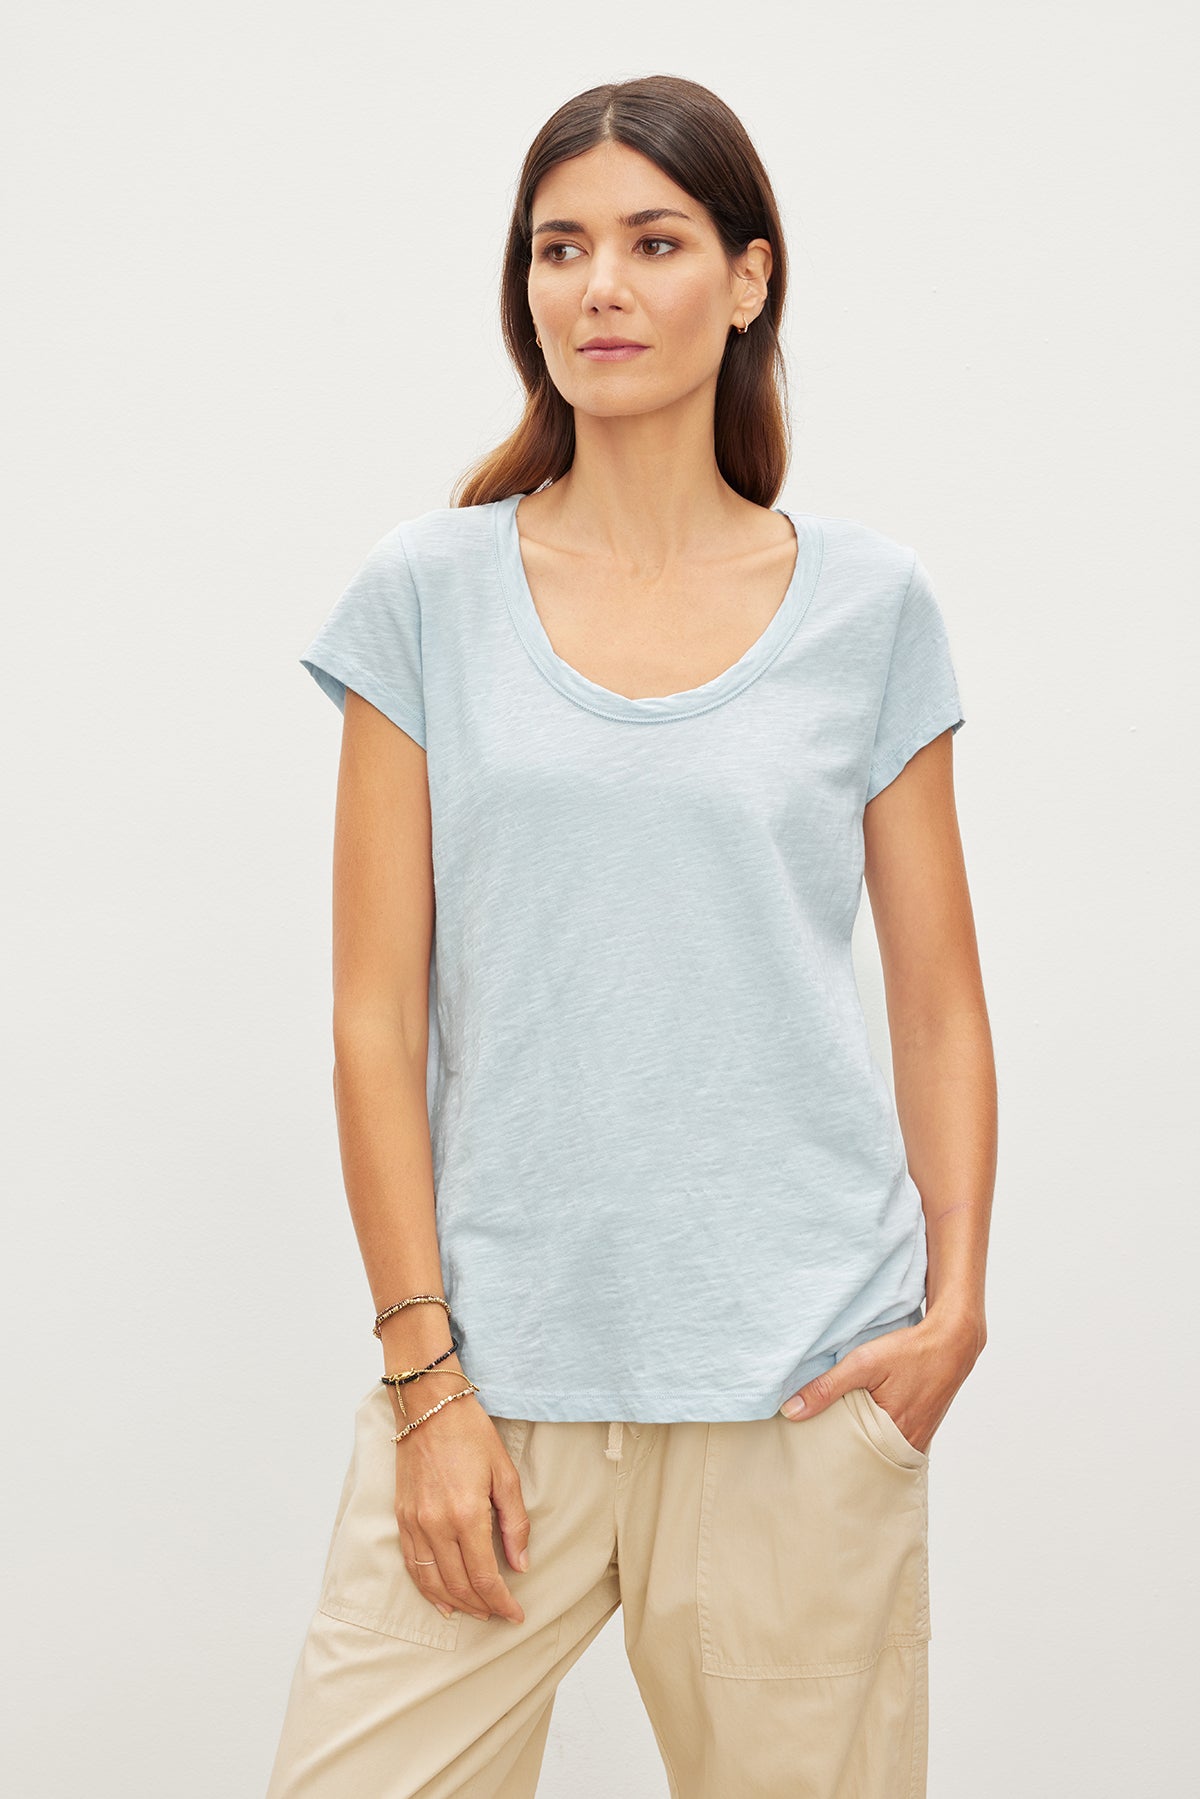 Woman in a light blue KIRA ORIGINAL SLUB SCOOP NECK TEE by Velvet by Graham & Spencer with vintage-cropped sleeves and scoop neck, paired with beige pants, standing against a plain background, looking slightly to the side.-35982850359489